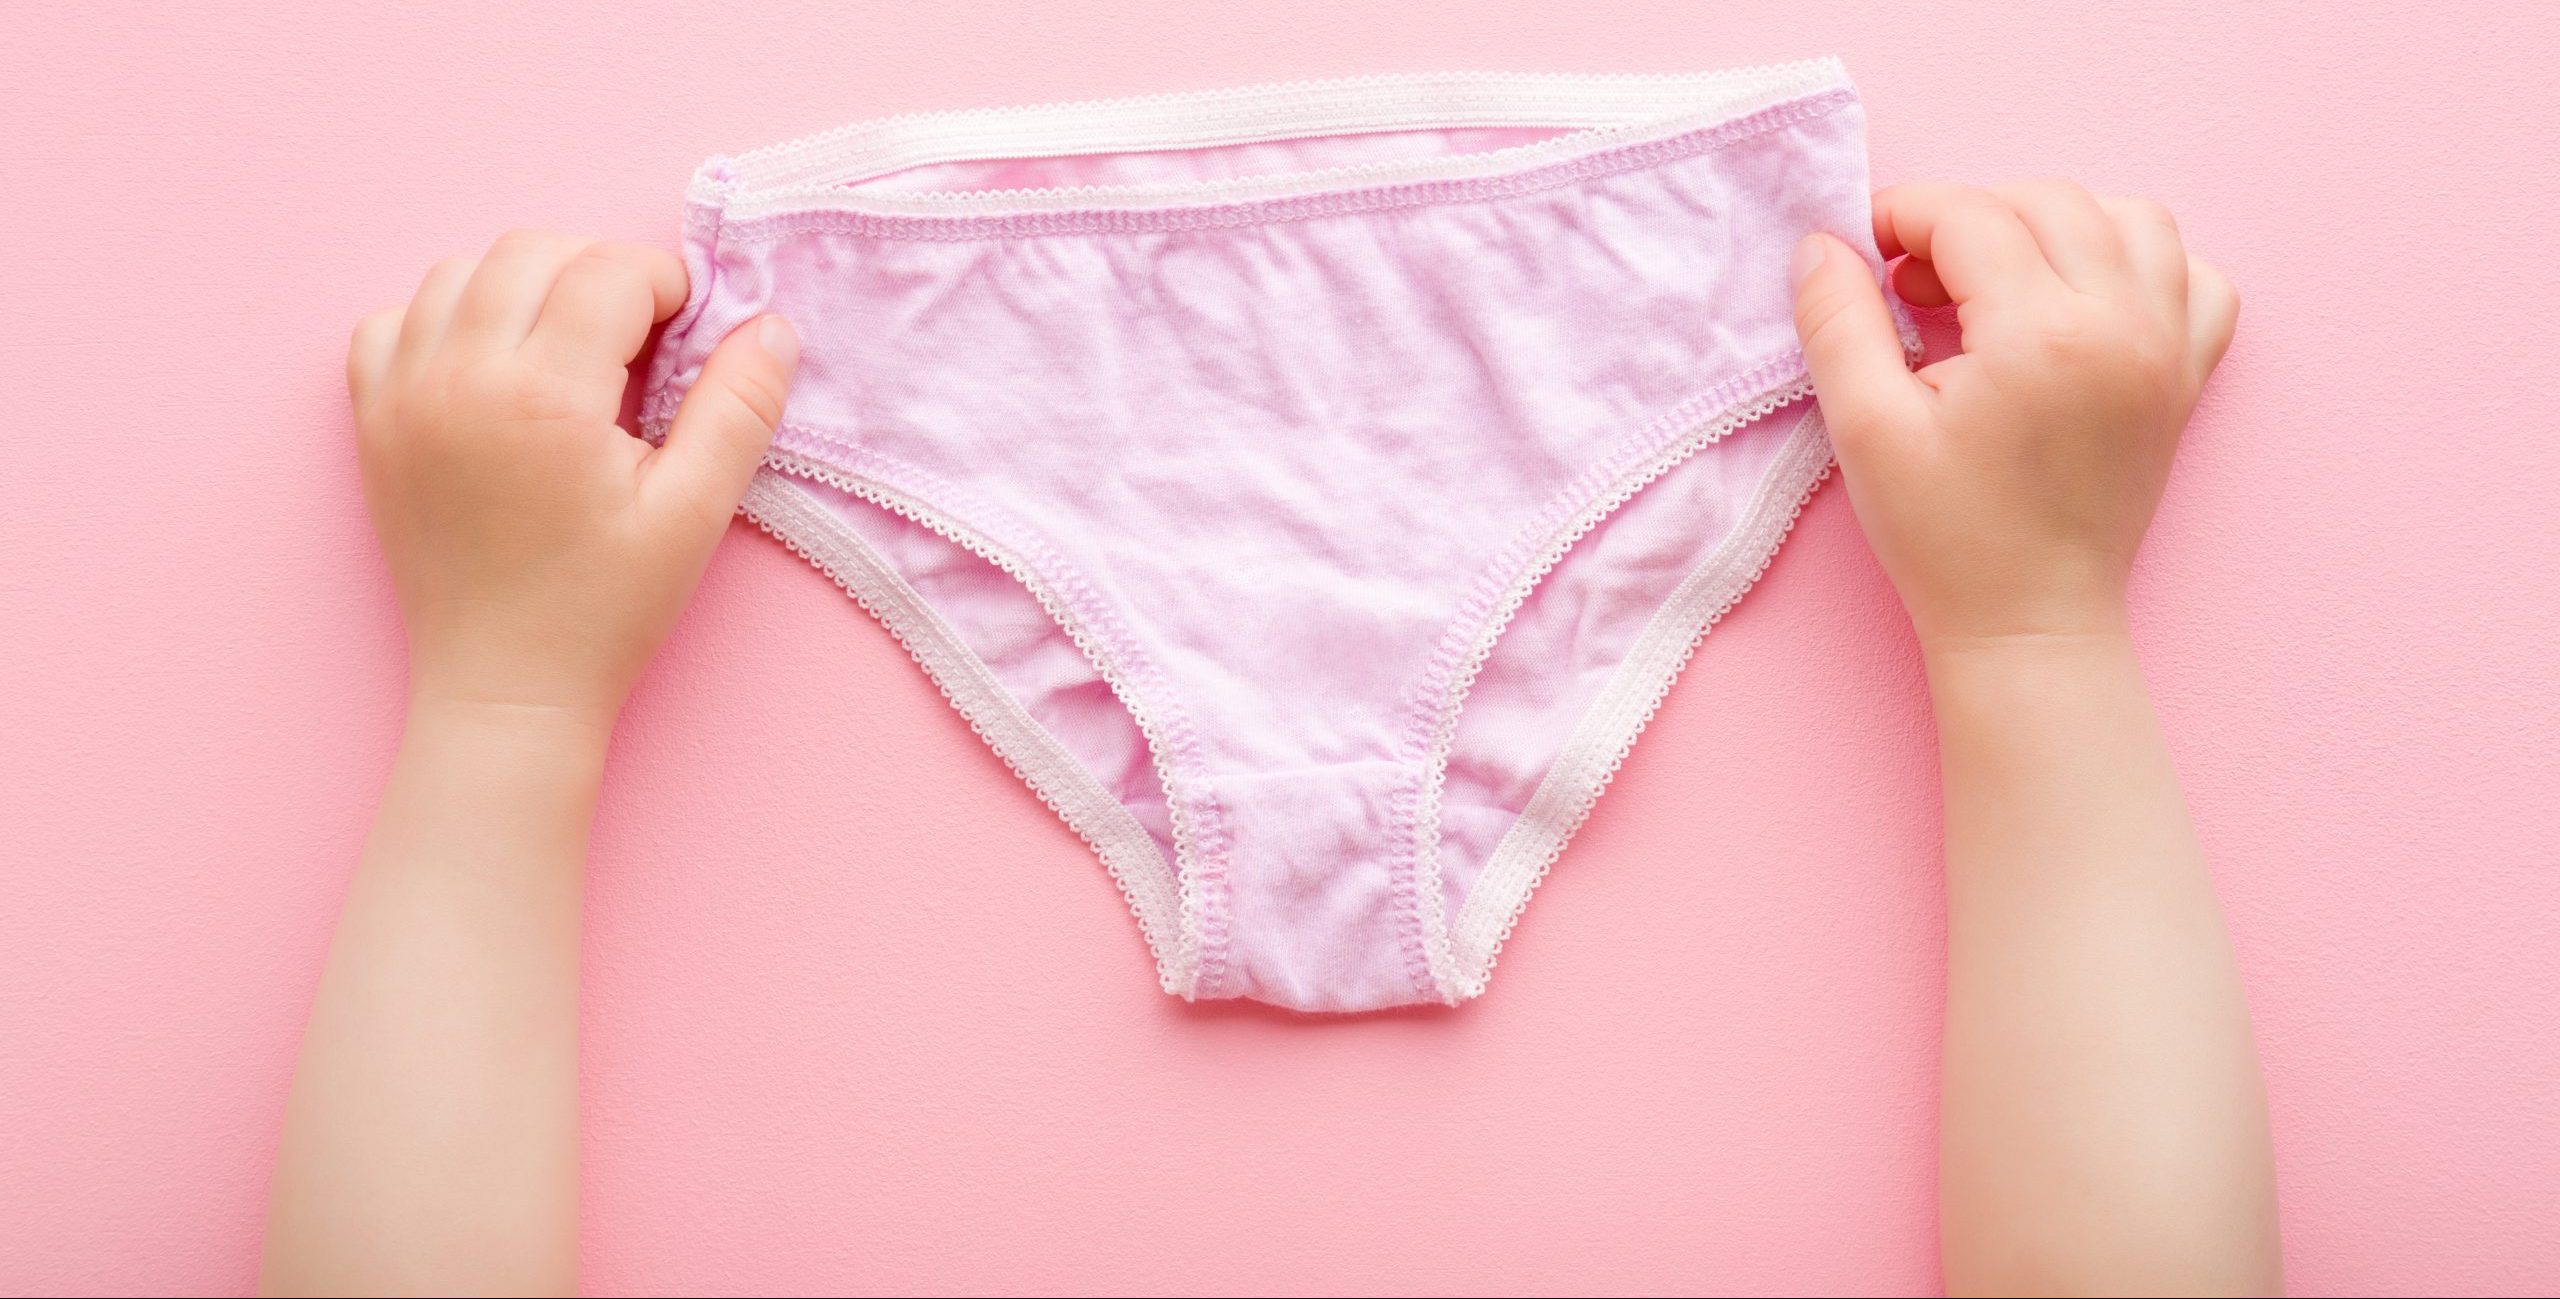 DO or DON'T: The Spare Pair (Pair of Sexy Underwear, That Is)